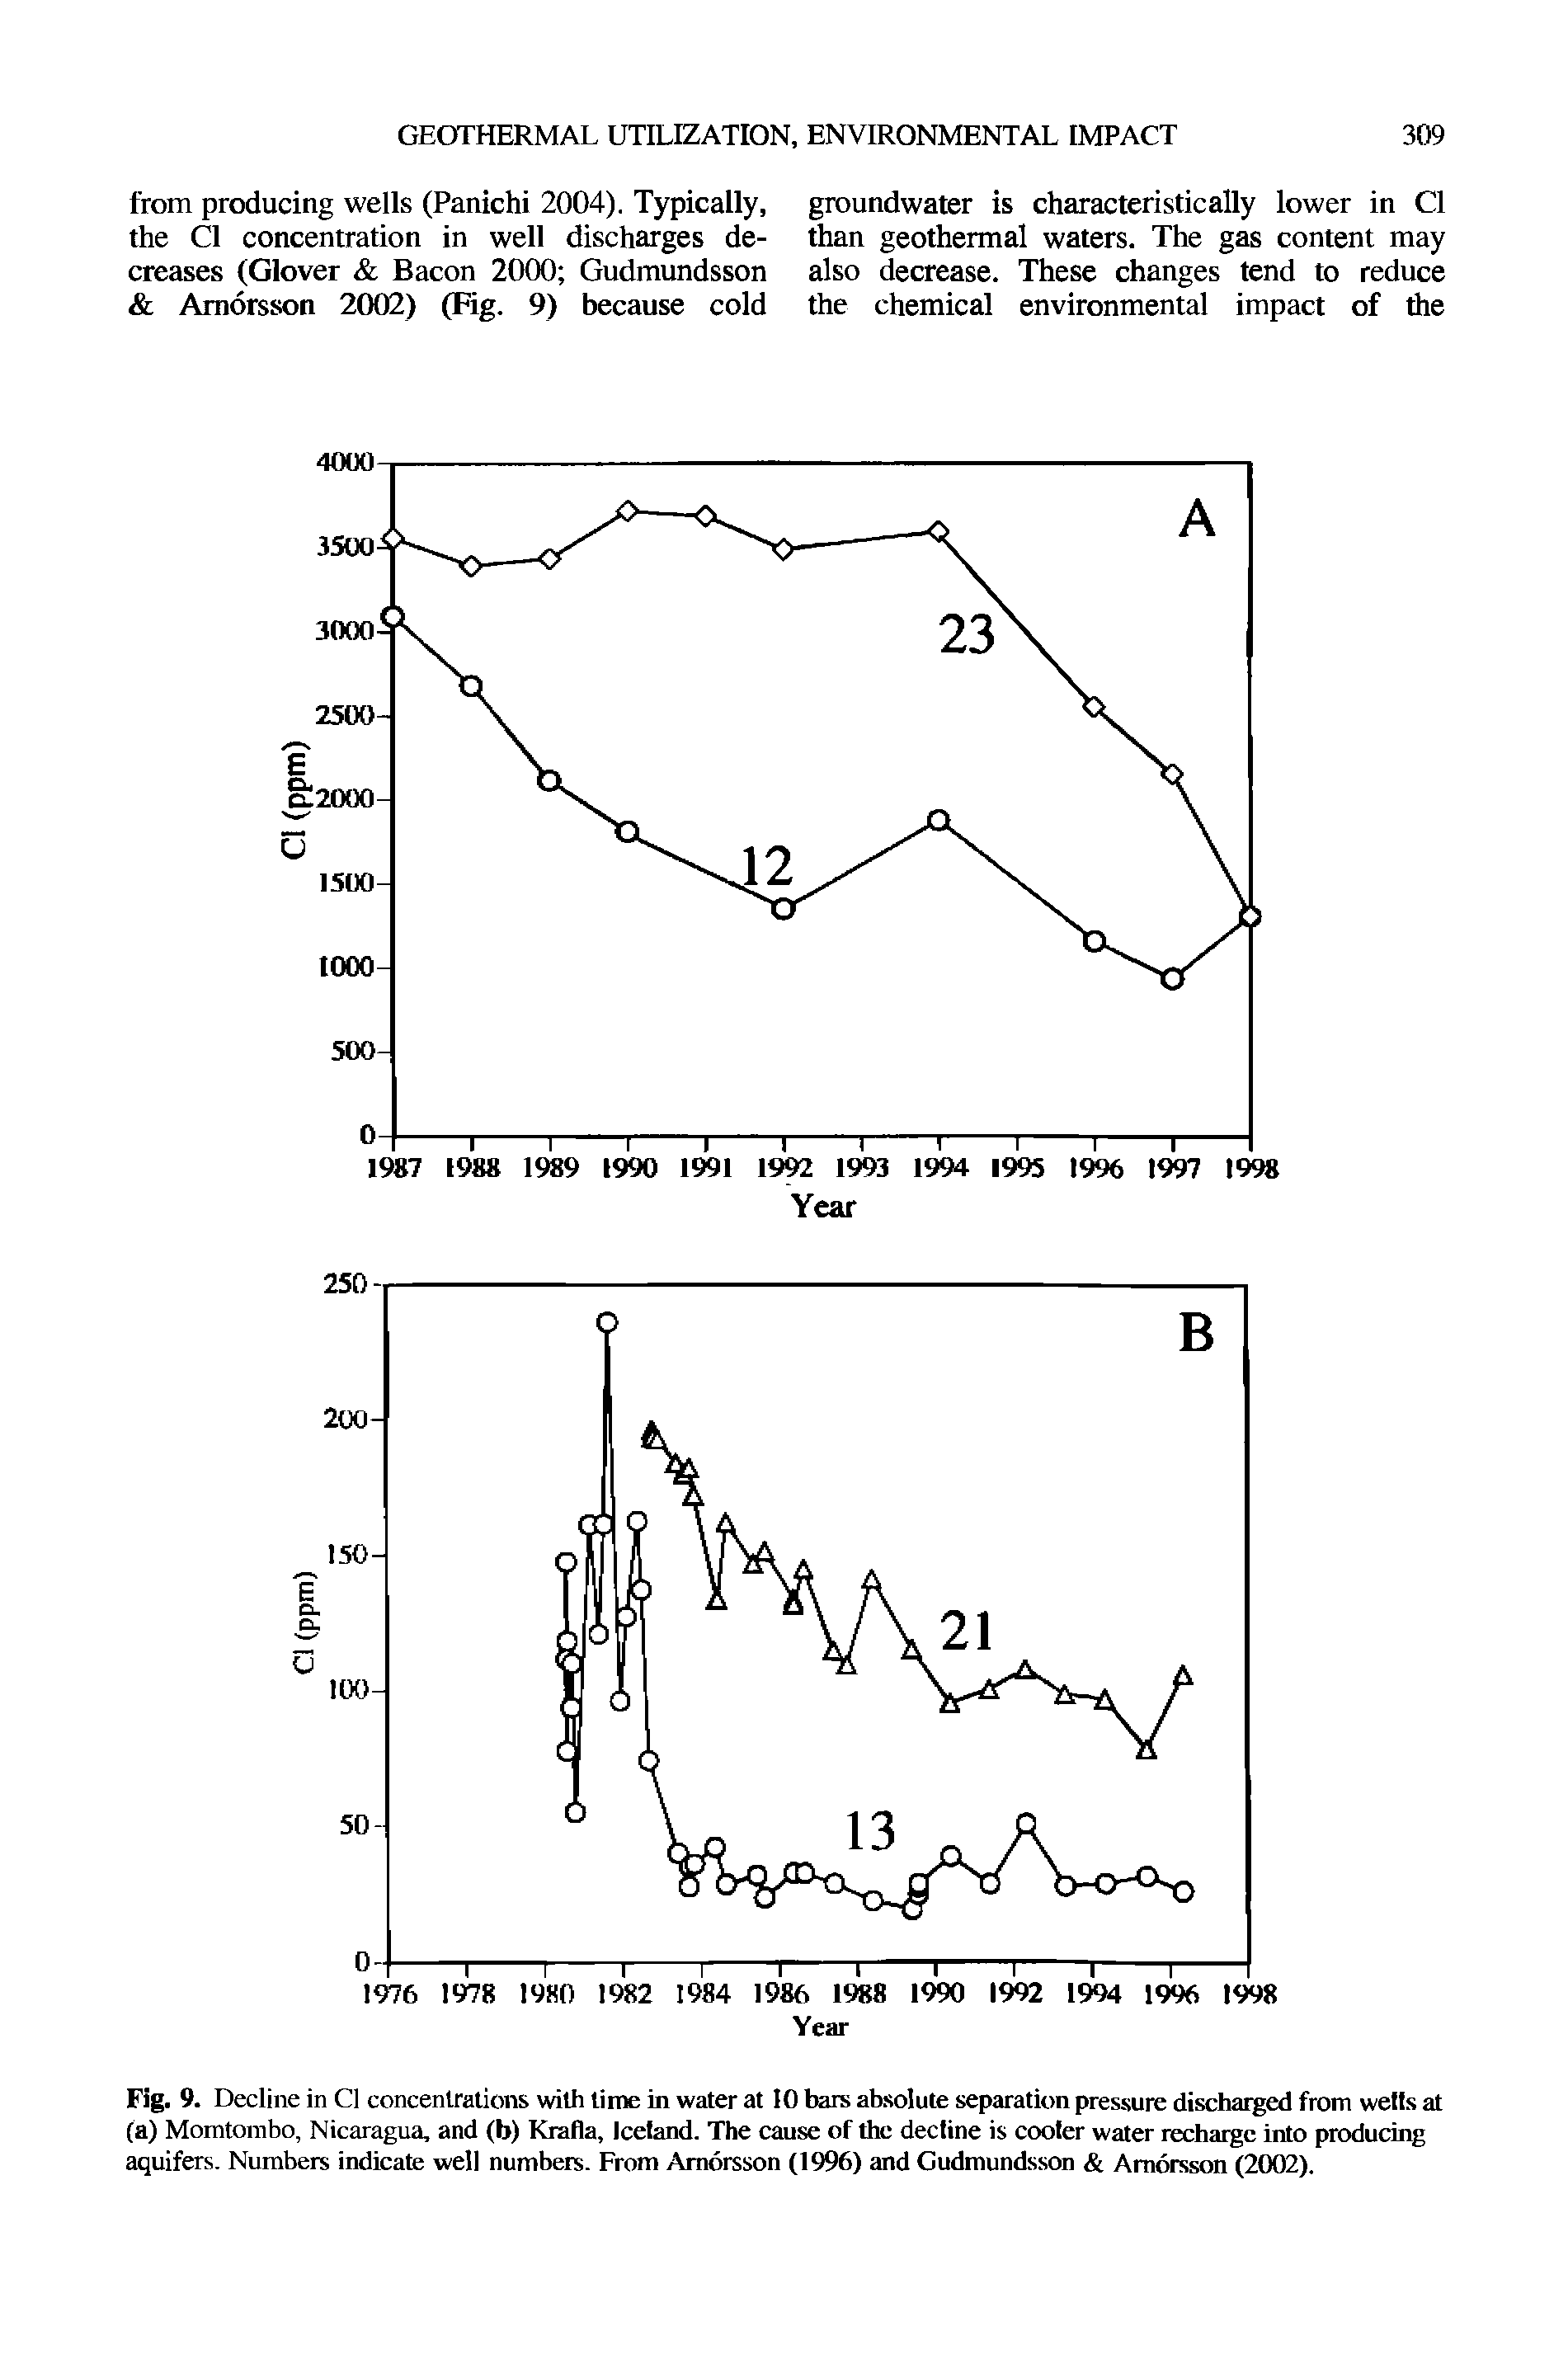 Fig. 9. Decline in Cl concentrations with time in water at 10 bars absolute separation pressure discharged from wells at (a) Momtombo, Nicaragua, and (b) Krafla, Iceland. The cause of the decline is cooler water recharge into producing aquifers. Numbers indicate well numbers. From Amorsson (1996) and Gudmundsson Amorsson (2002).